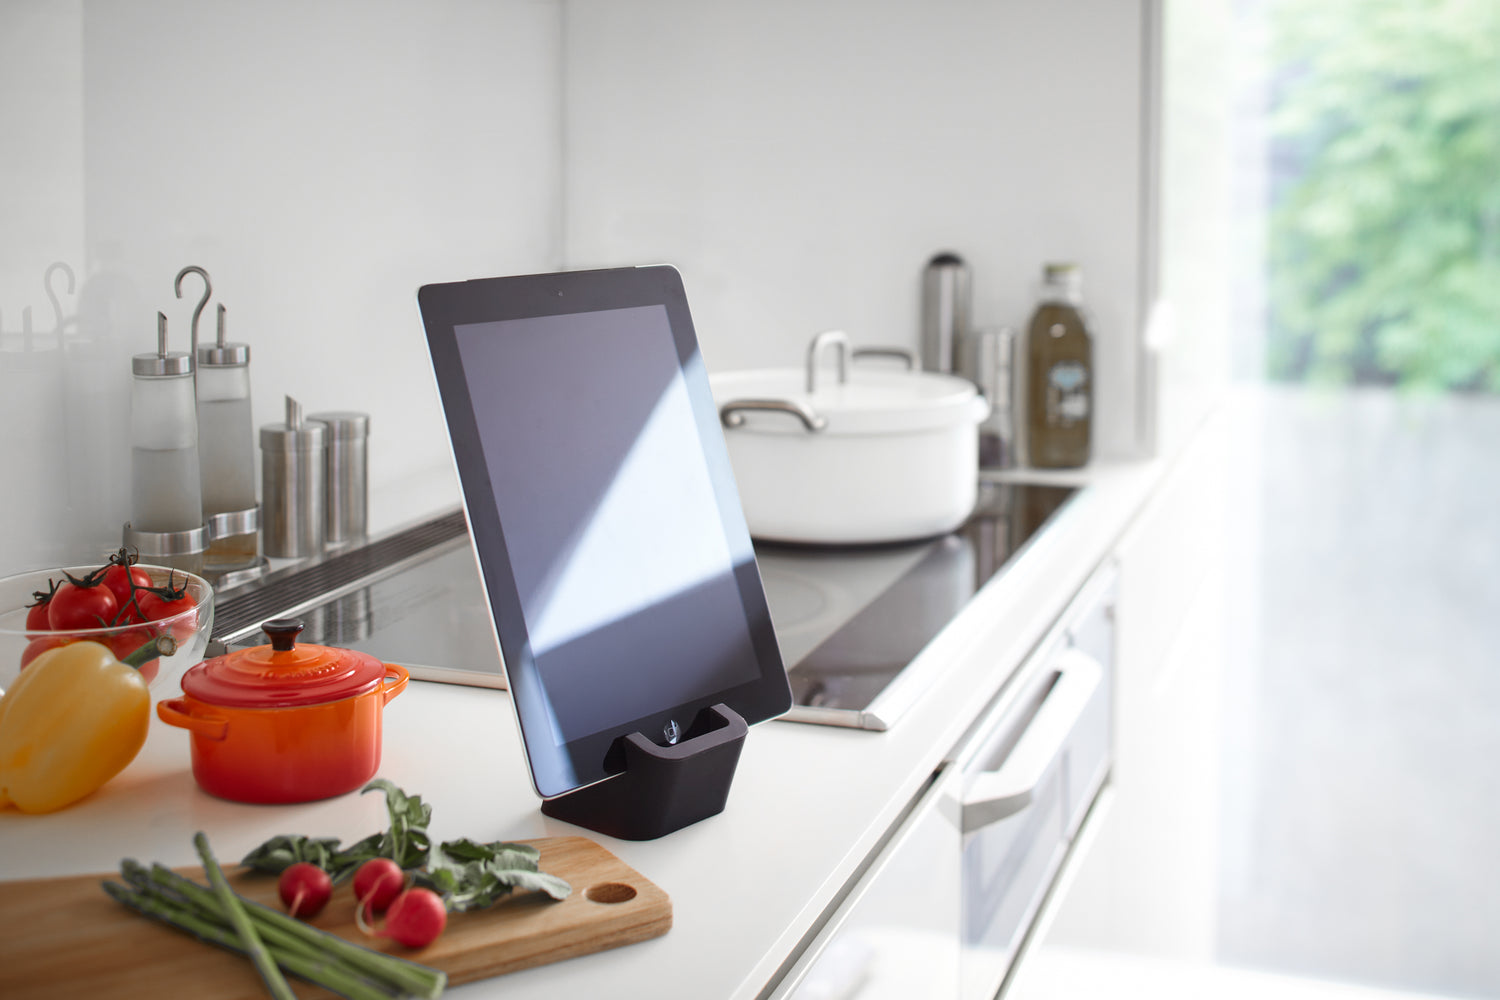 View 7 - Side view of black Tablet Stand holding tablet in kitchen by Yamazaki Home.